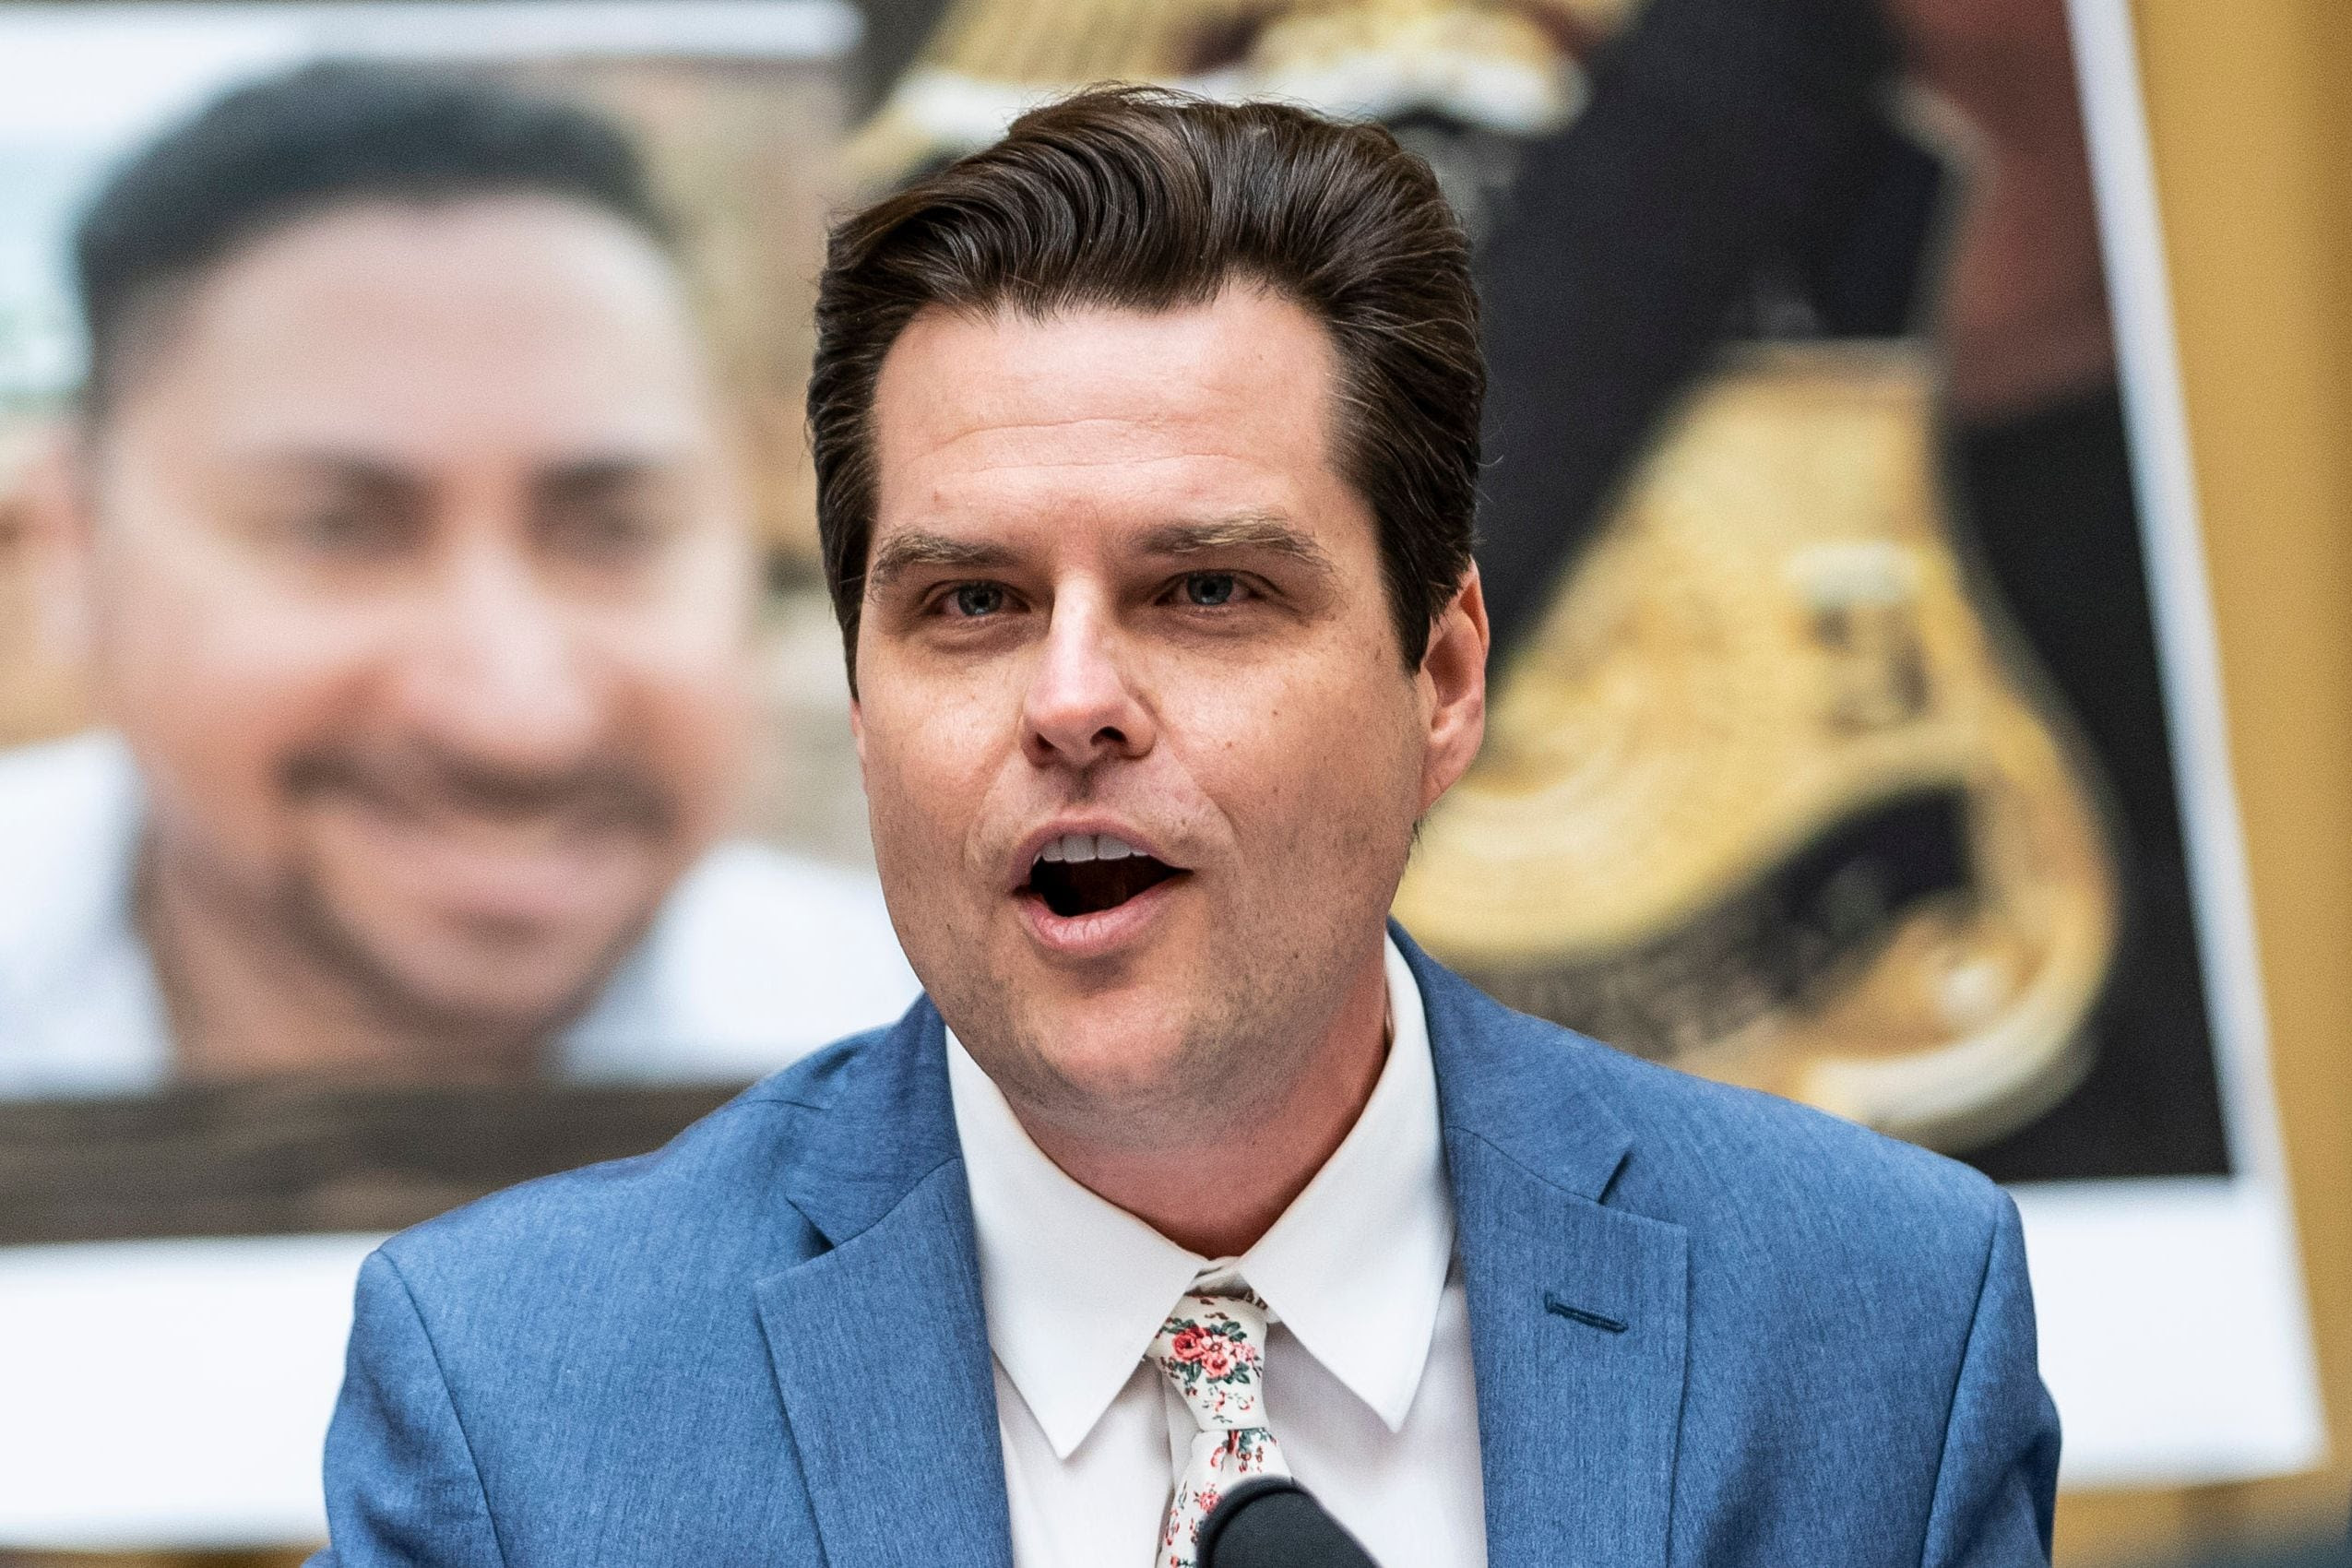 Rep. Matt Gaetz unlikely to be charged in sex-trafficking probe